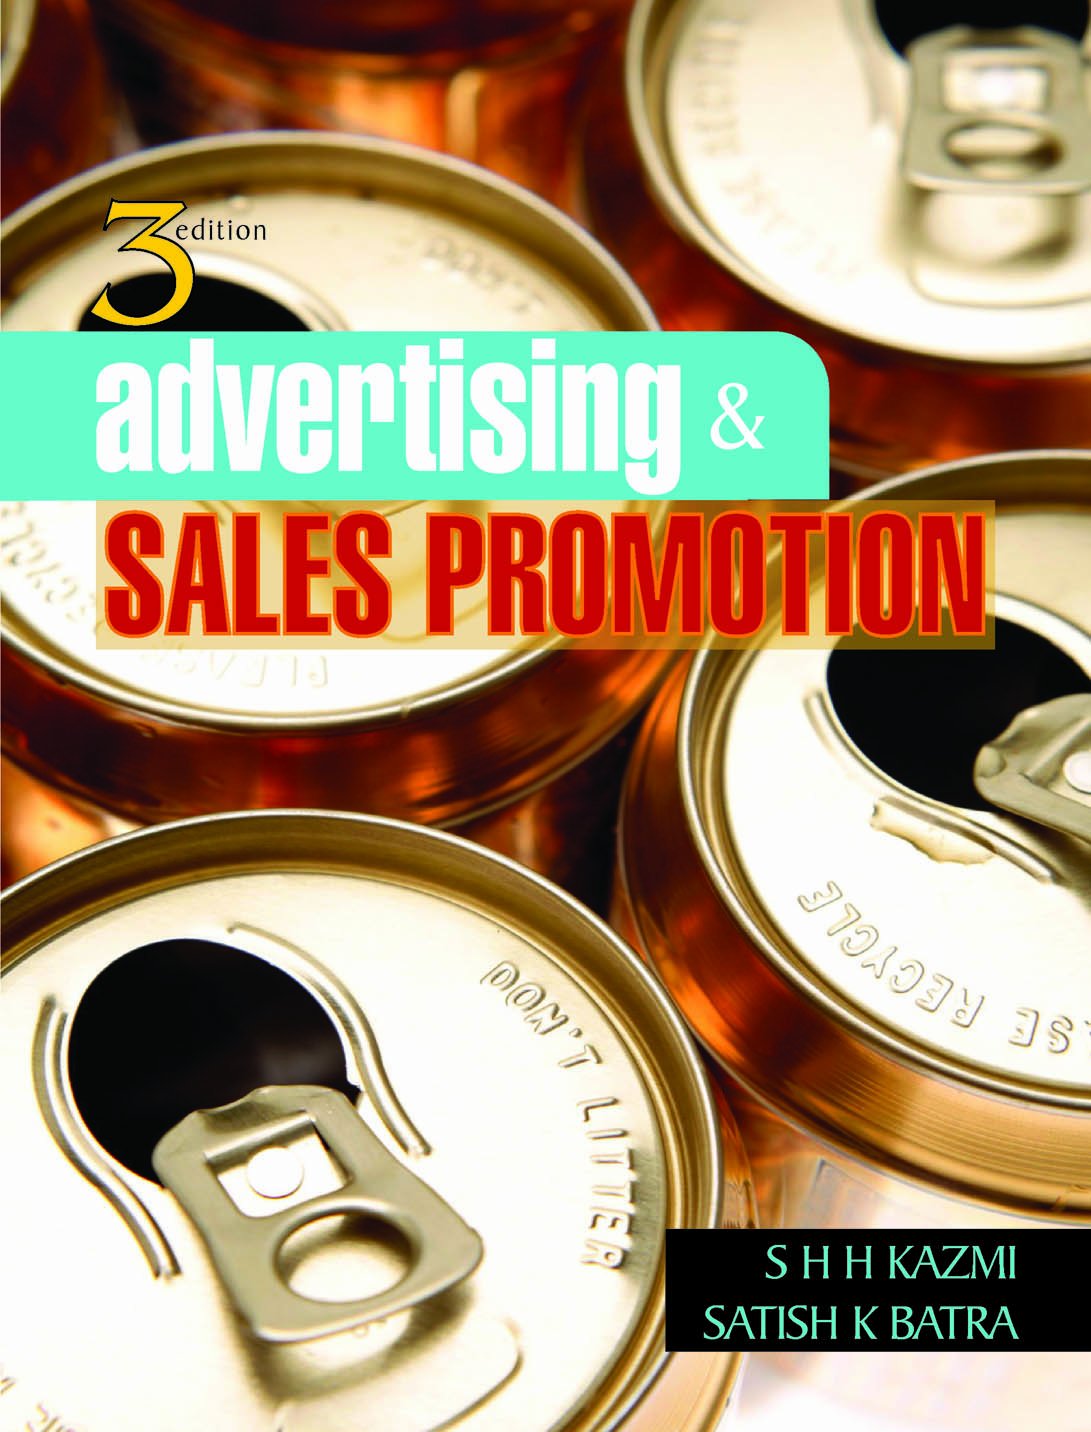 Sales Promotion And Advertising for Seeds